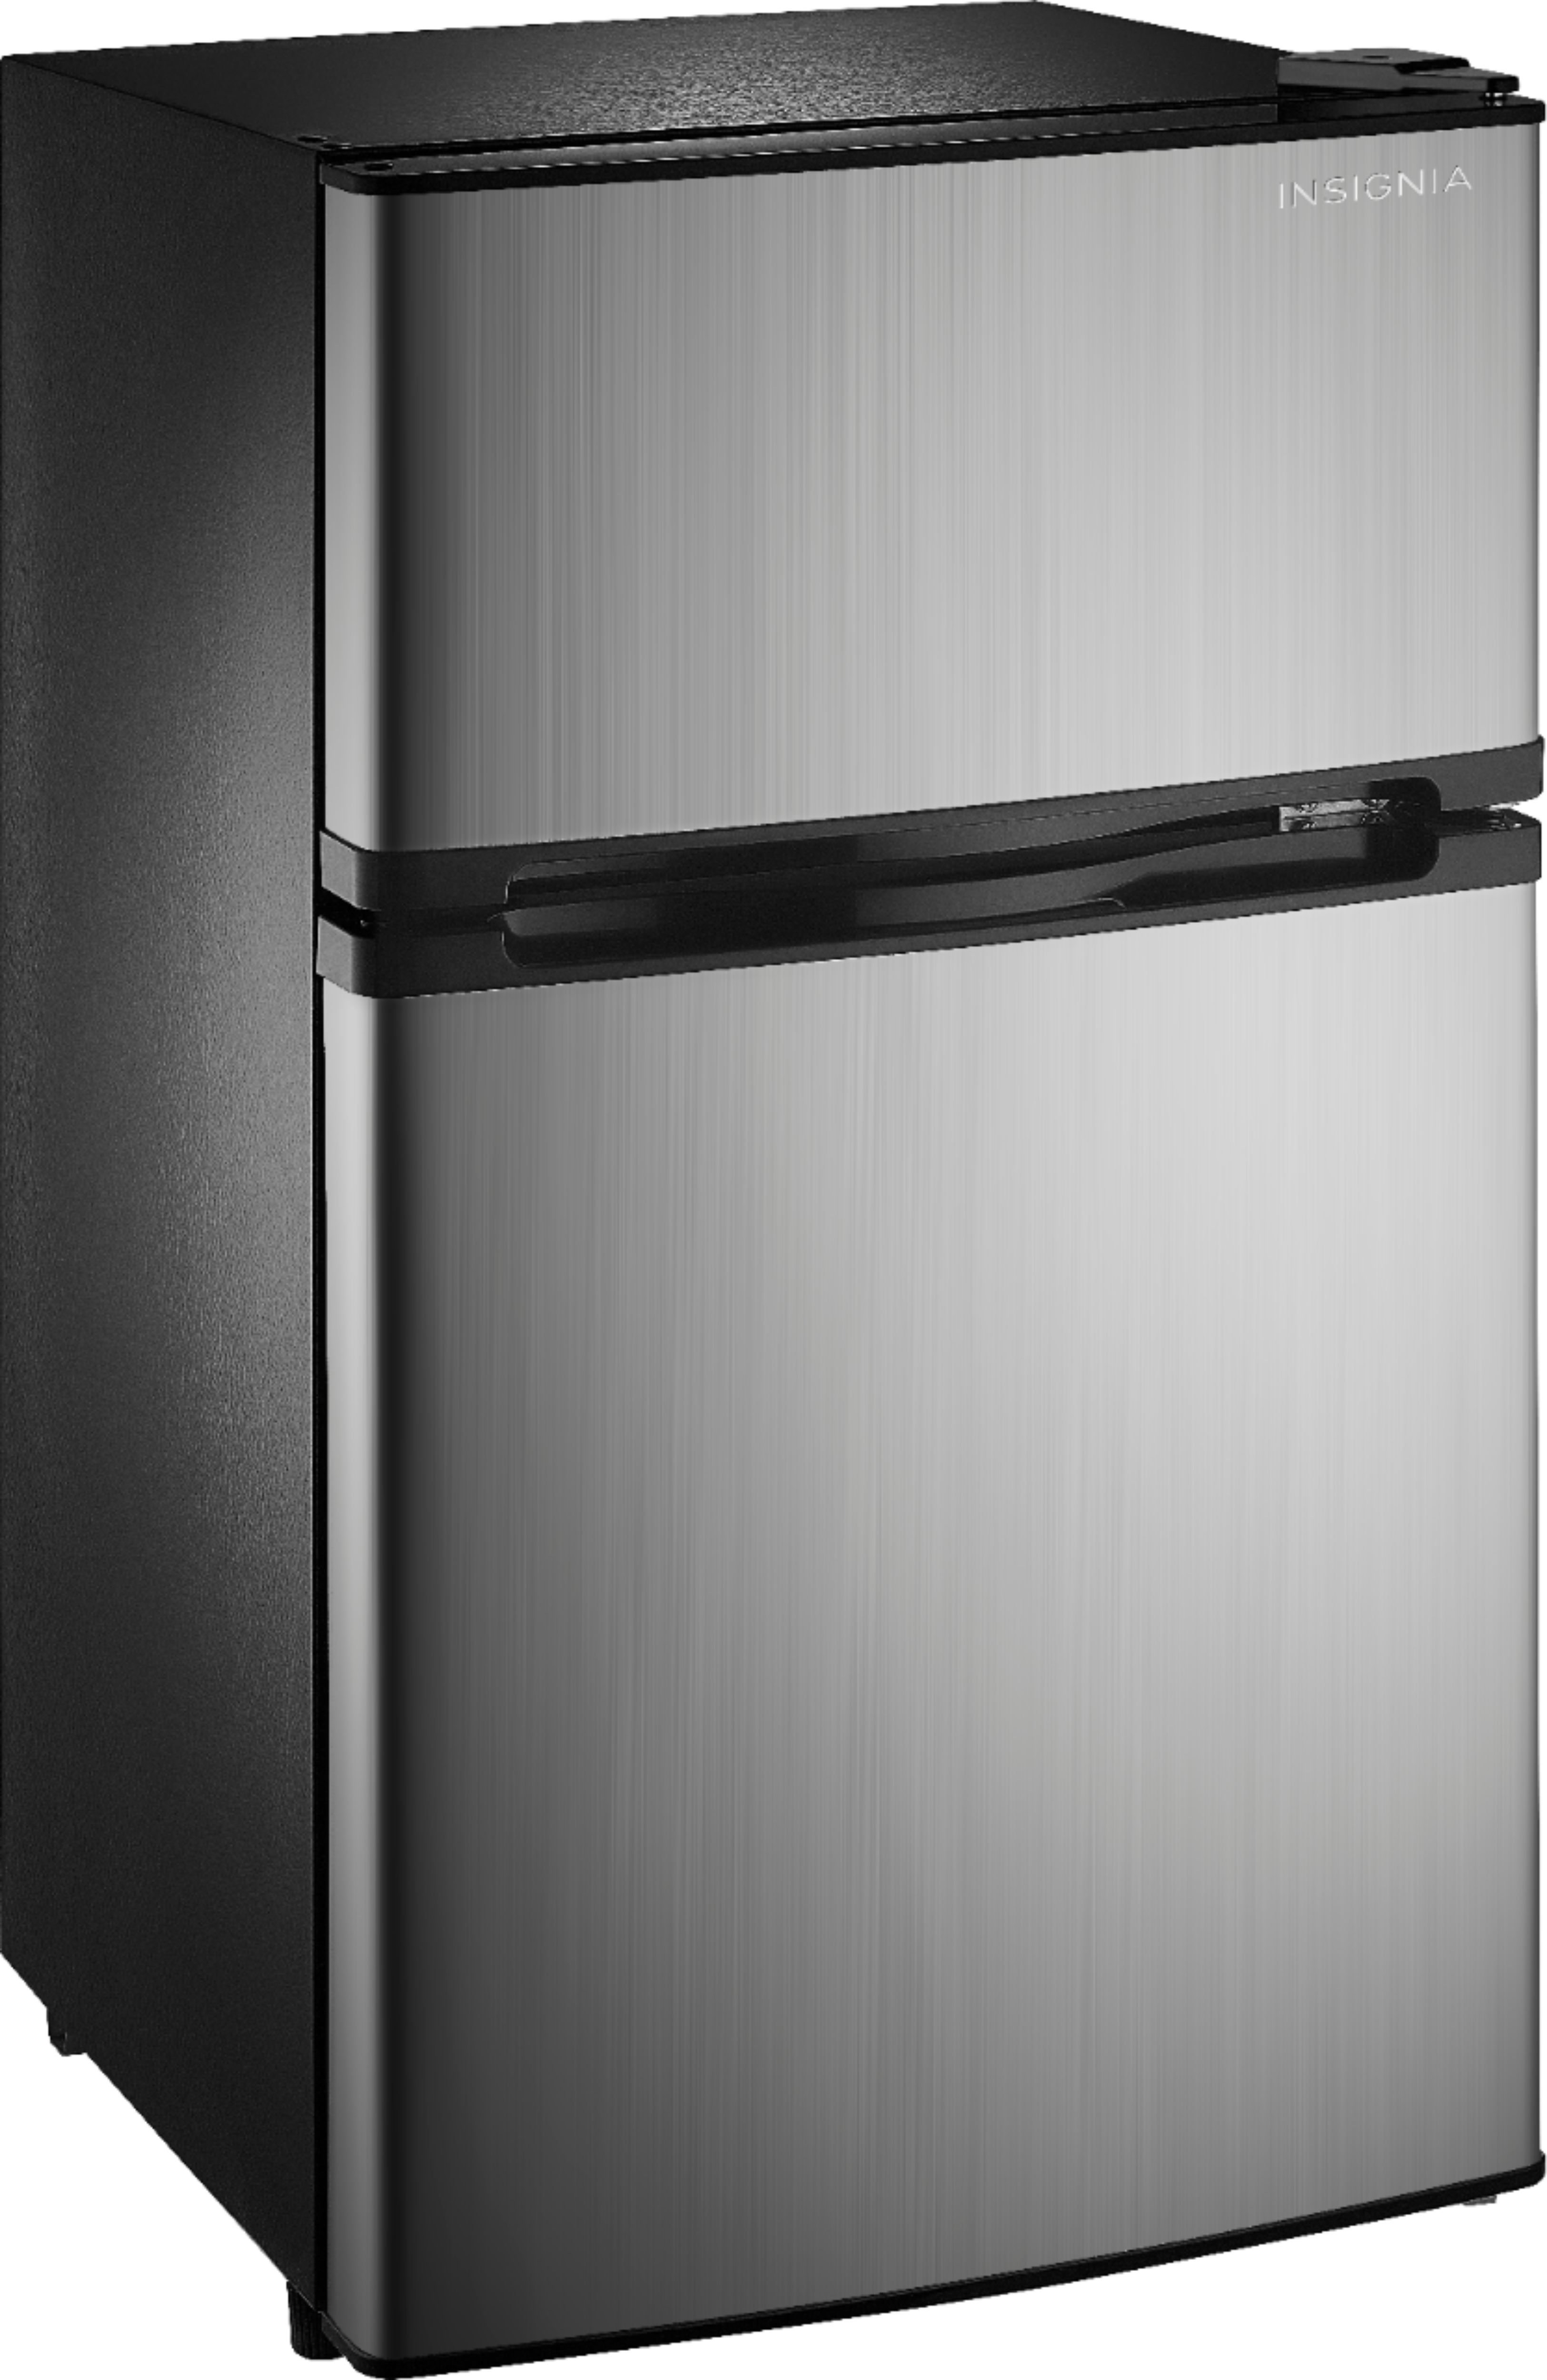 Insignia 2 door 3.0 Cu. Ft. Mini Fridge - Stainless steel – Master Outlet  Inc